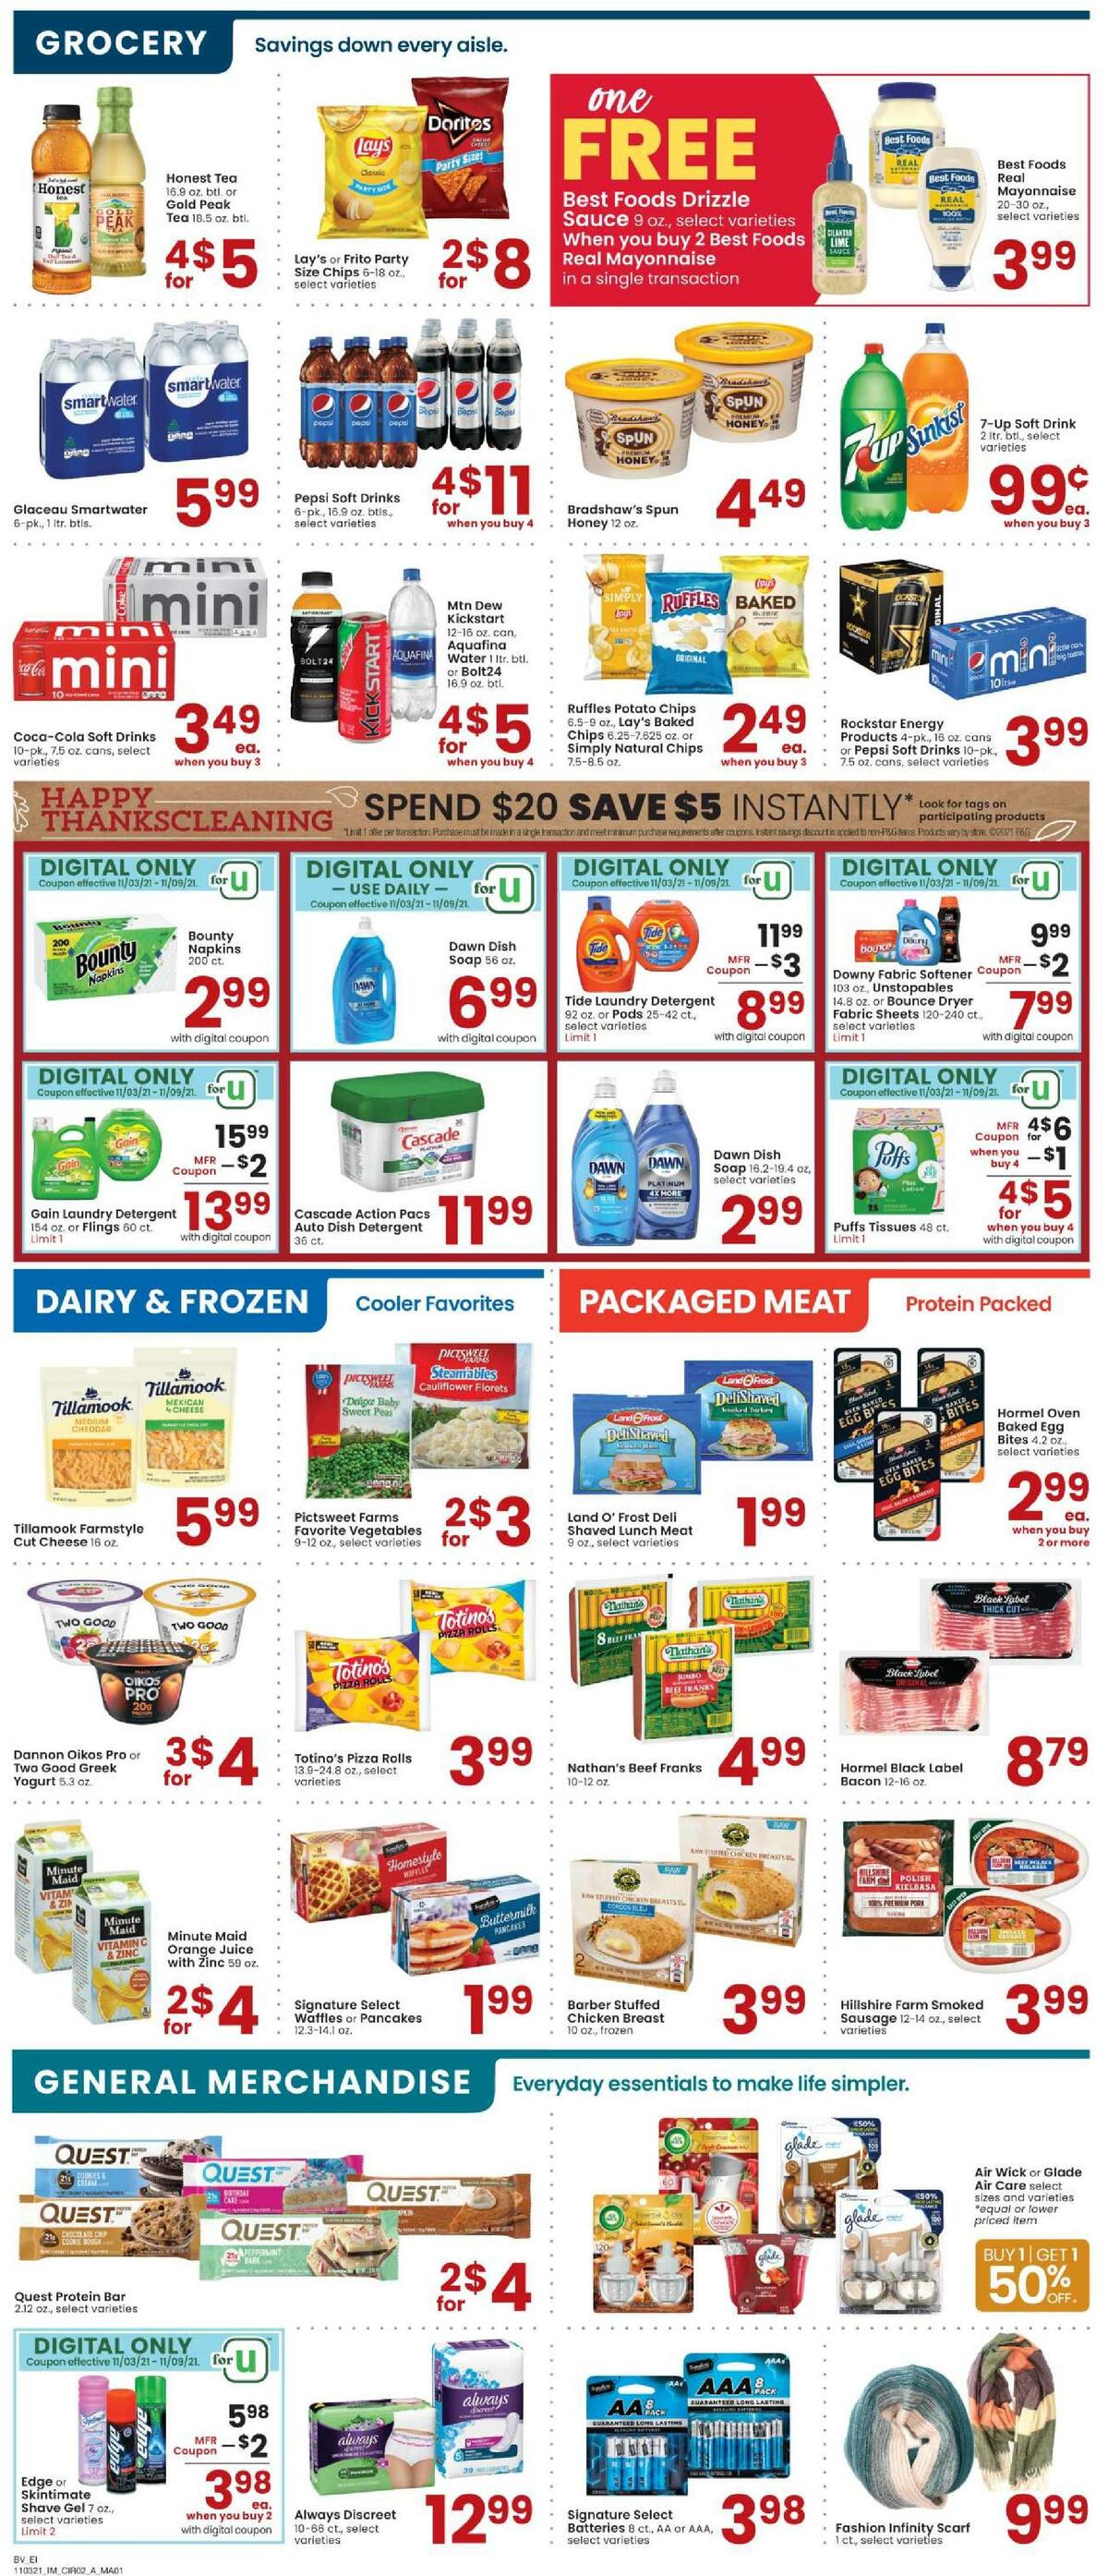 Albertsons Weekly Ad from November 3